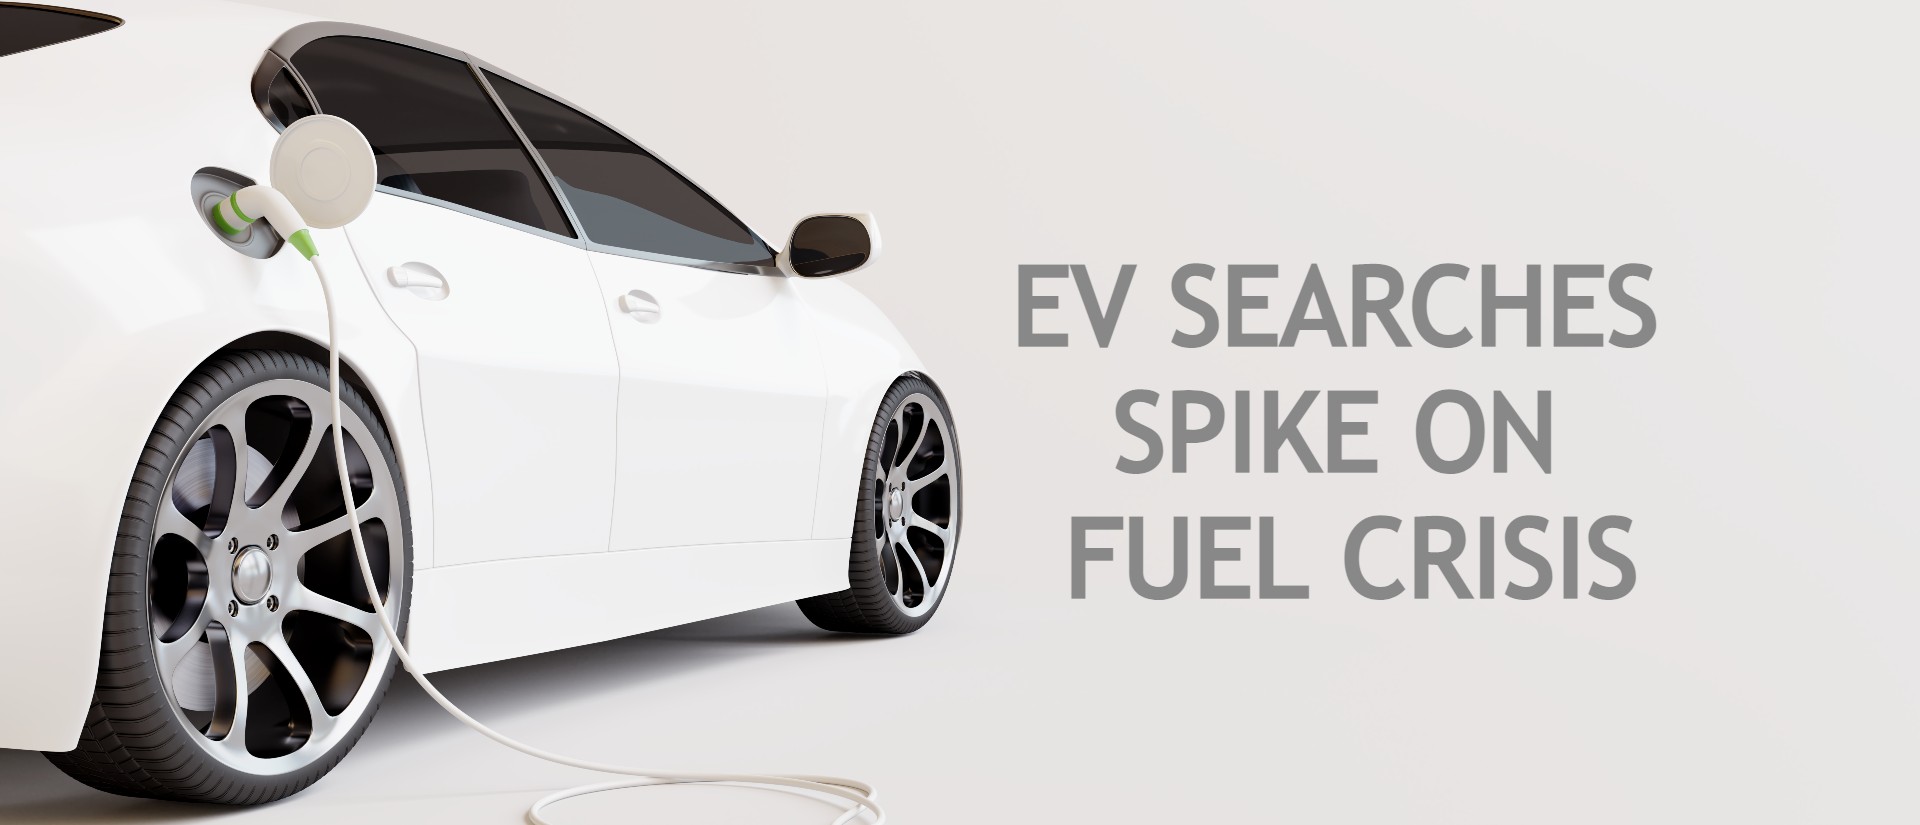 ev searches spike on fuel crisis 1